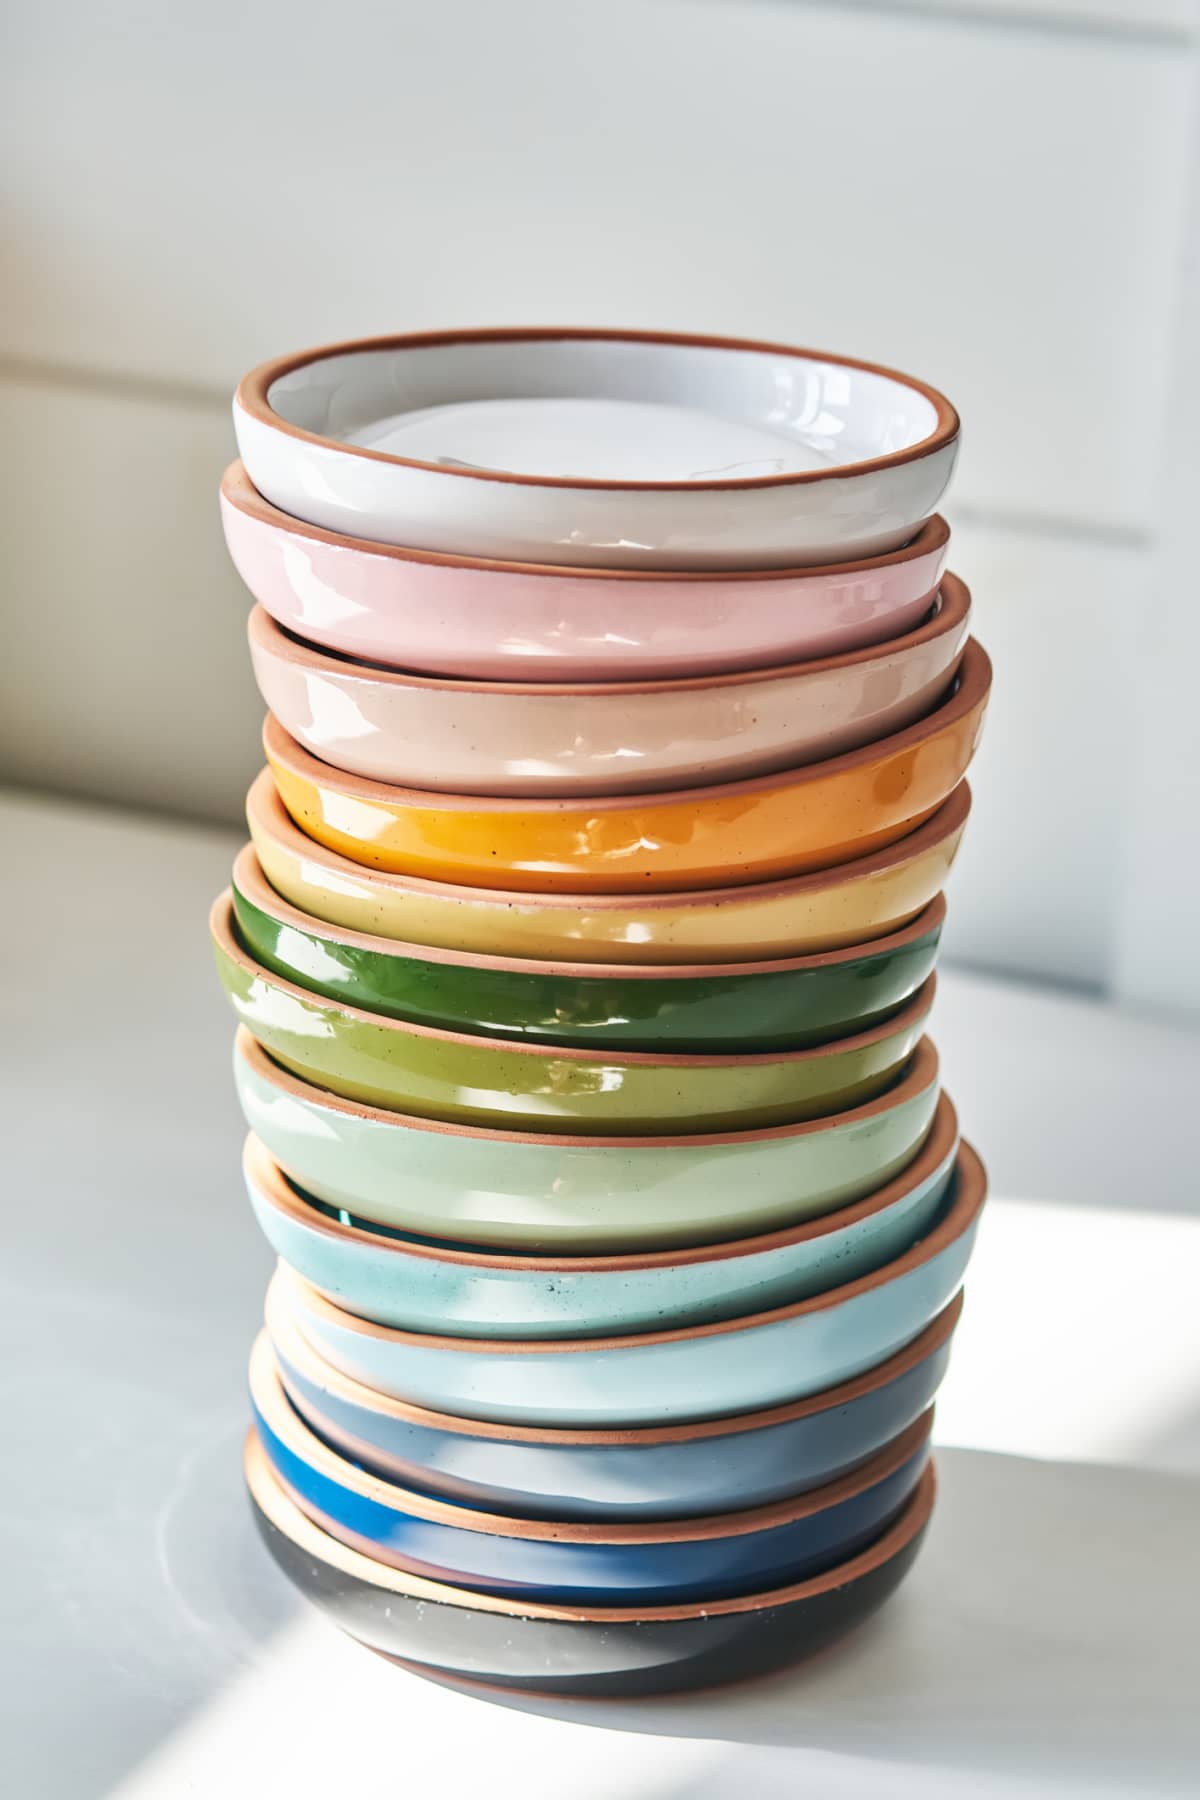 A stack of bright multicolored ceramic plates on a white background.